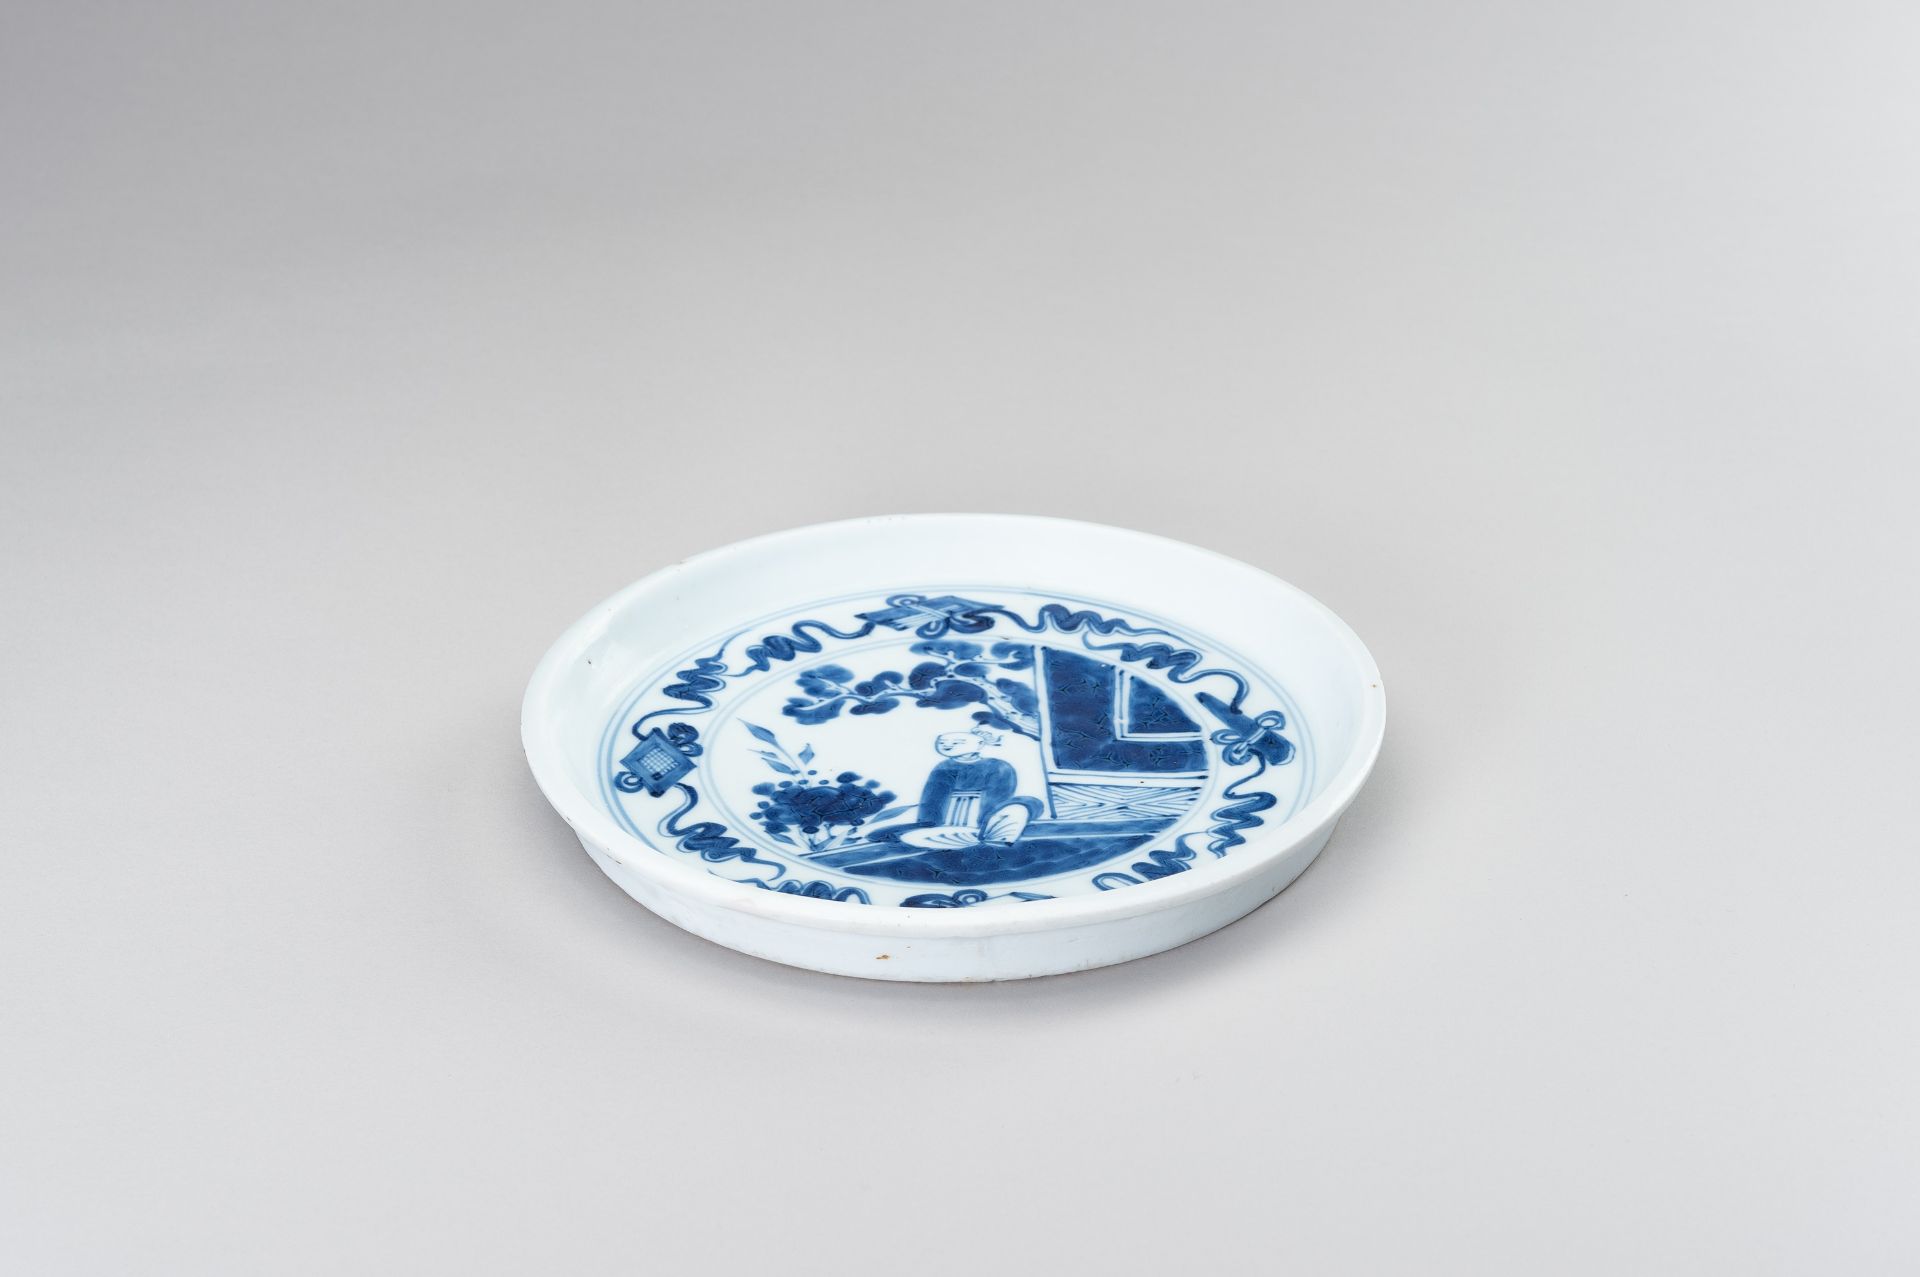 A BLUE AND WHITE PORCELAIN TRAY WITH A COURT BOY - Image 2 of 5